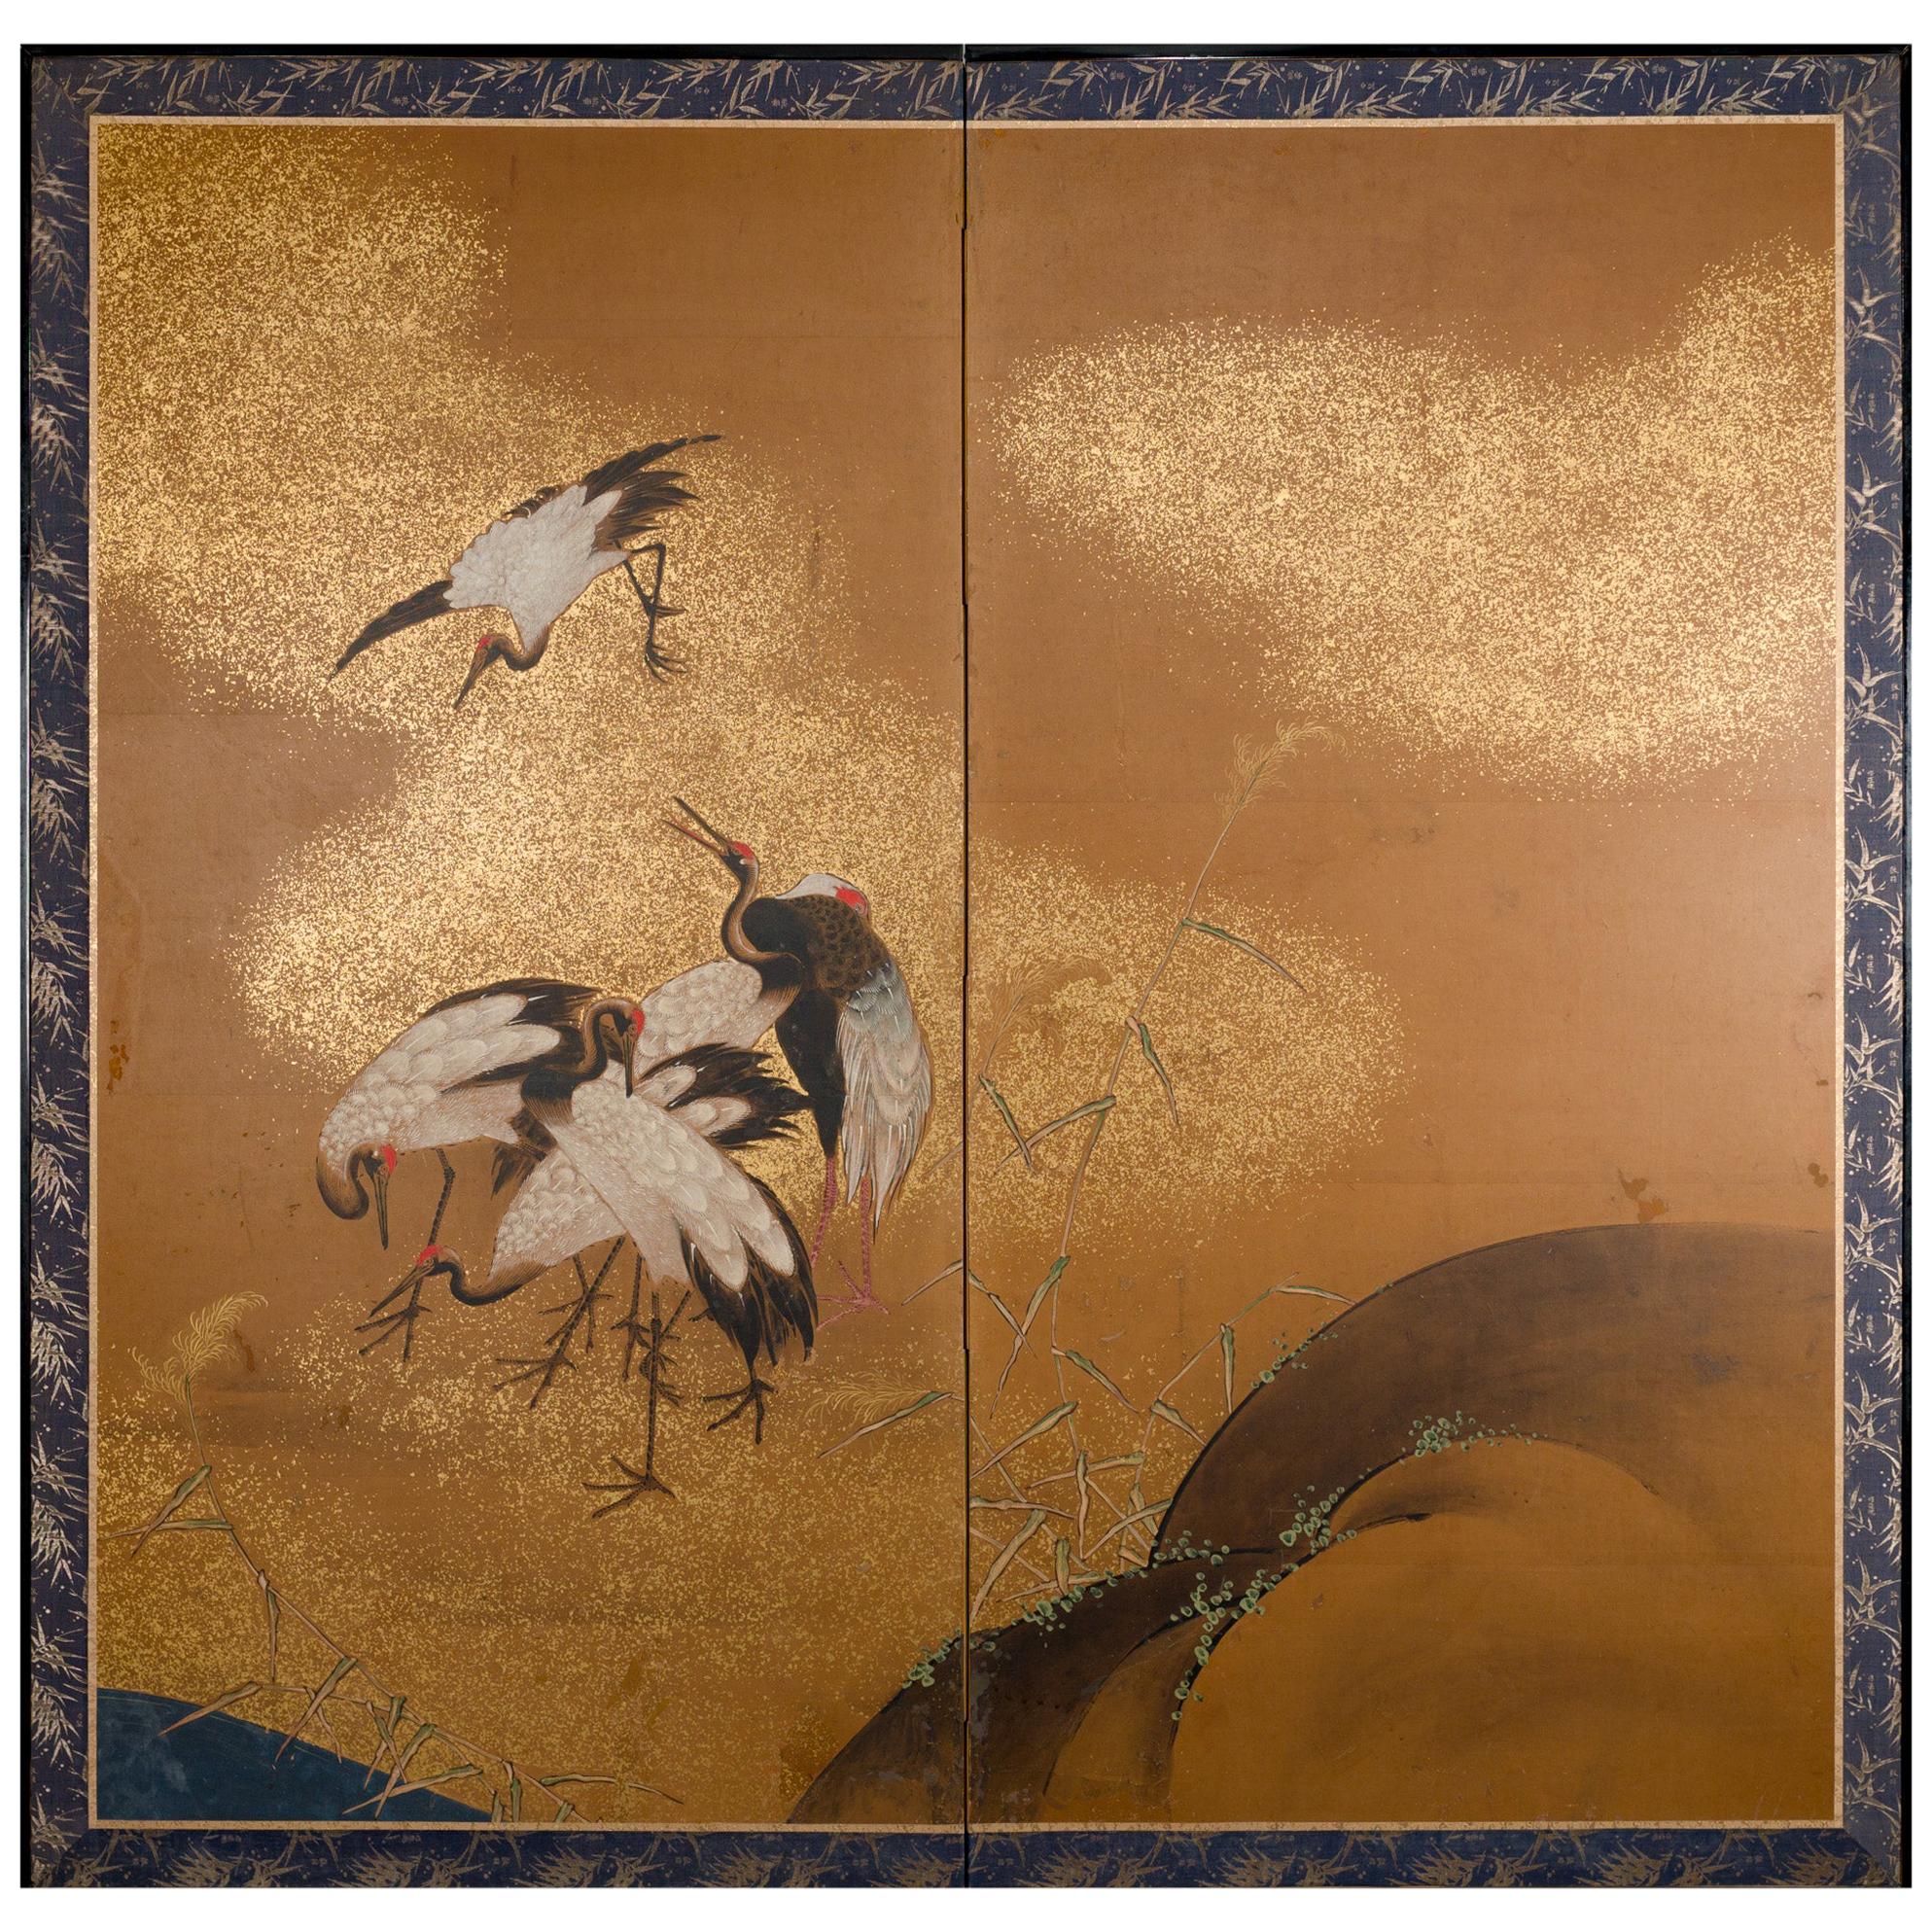 Japanese Two Panel Screen Sedge of Cranes in Rolling Landscape with Gold Clouds